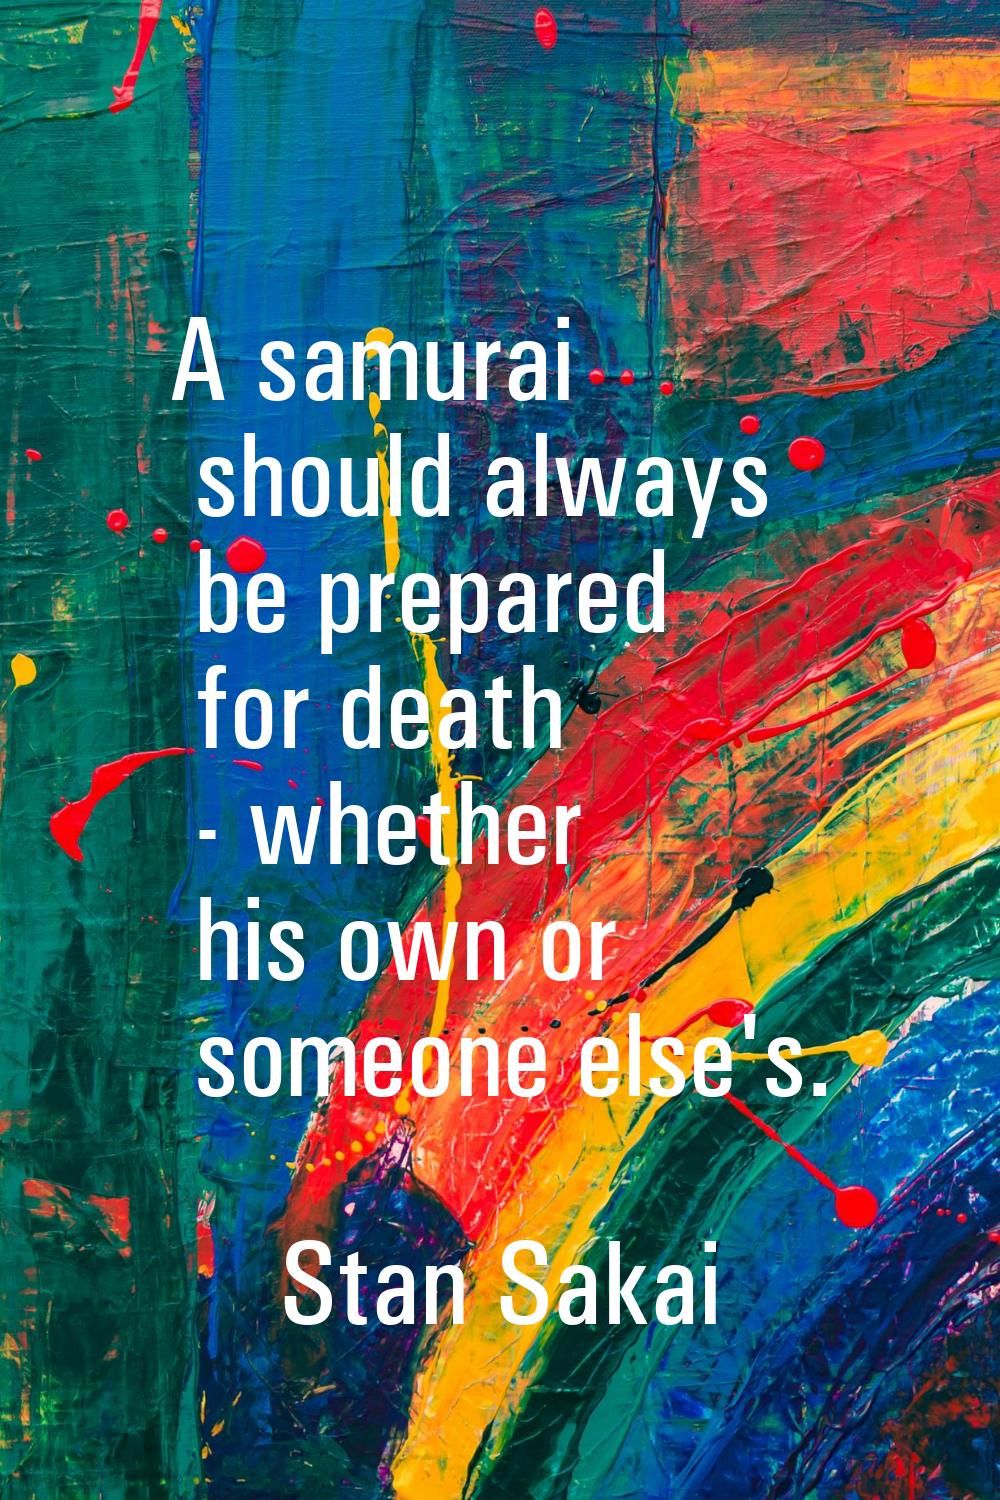 A samurai should always be prepared for death - whether his own or someone else's.